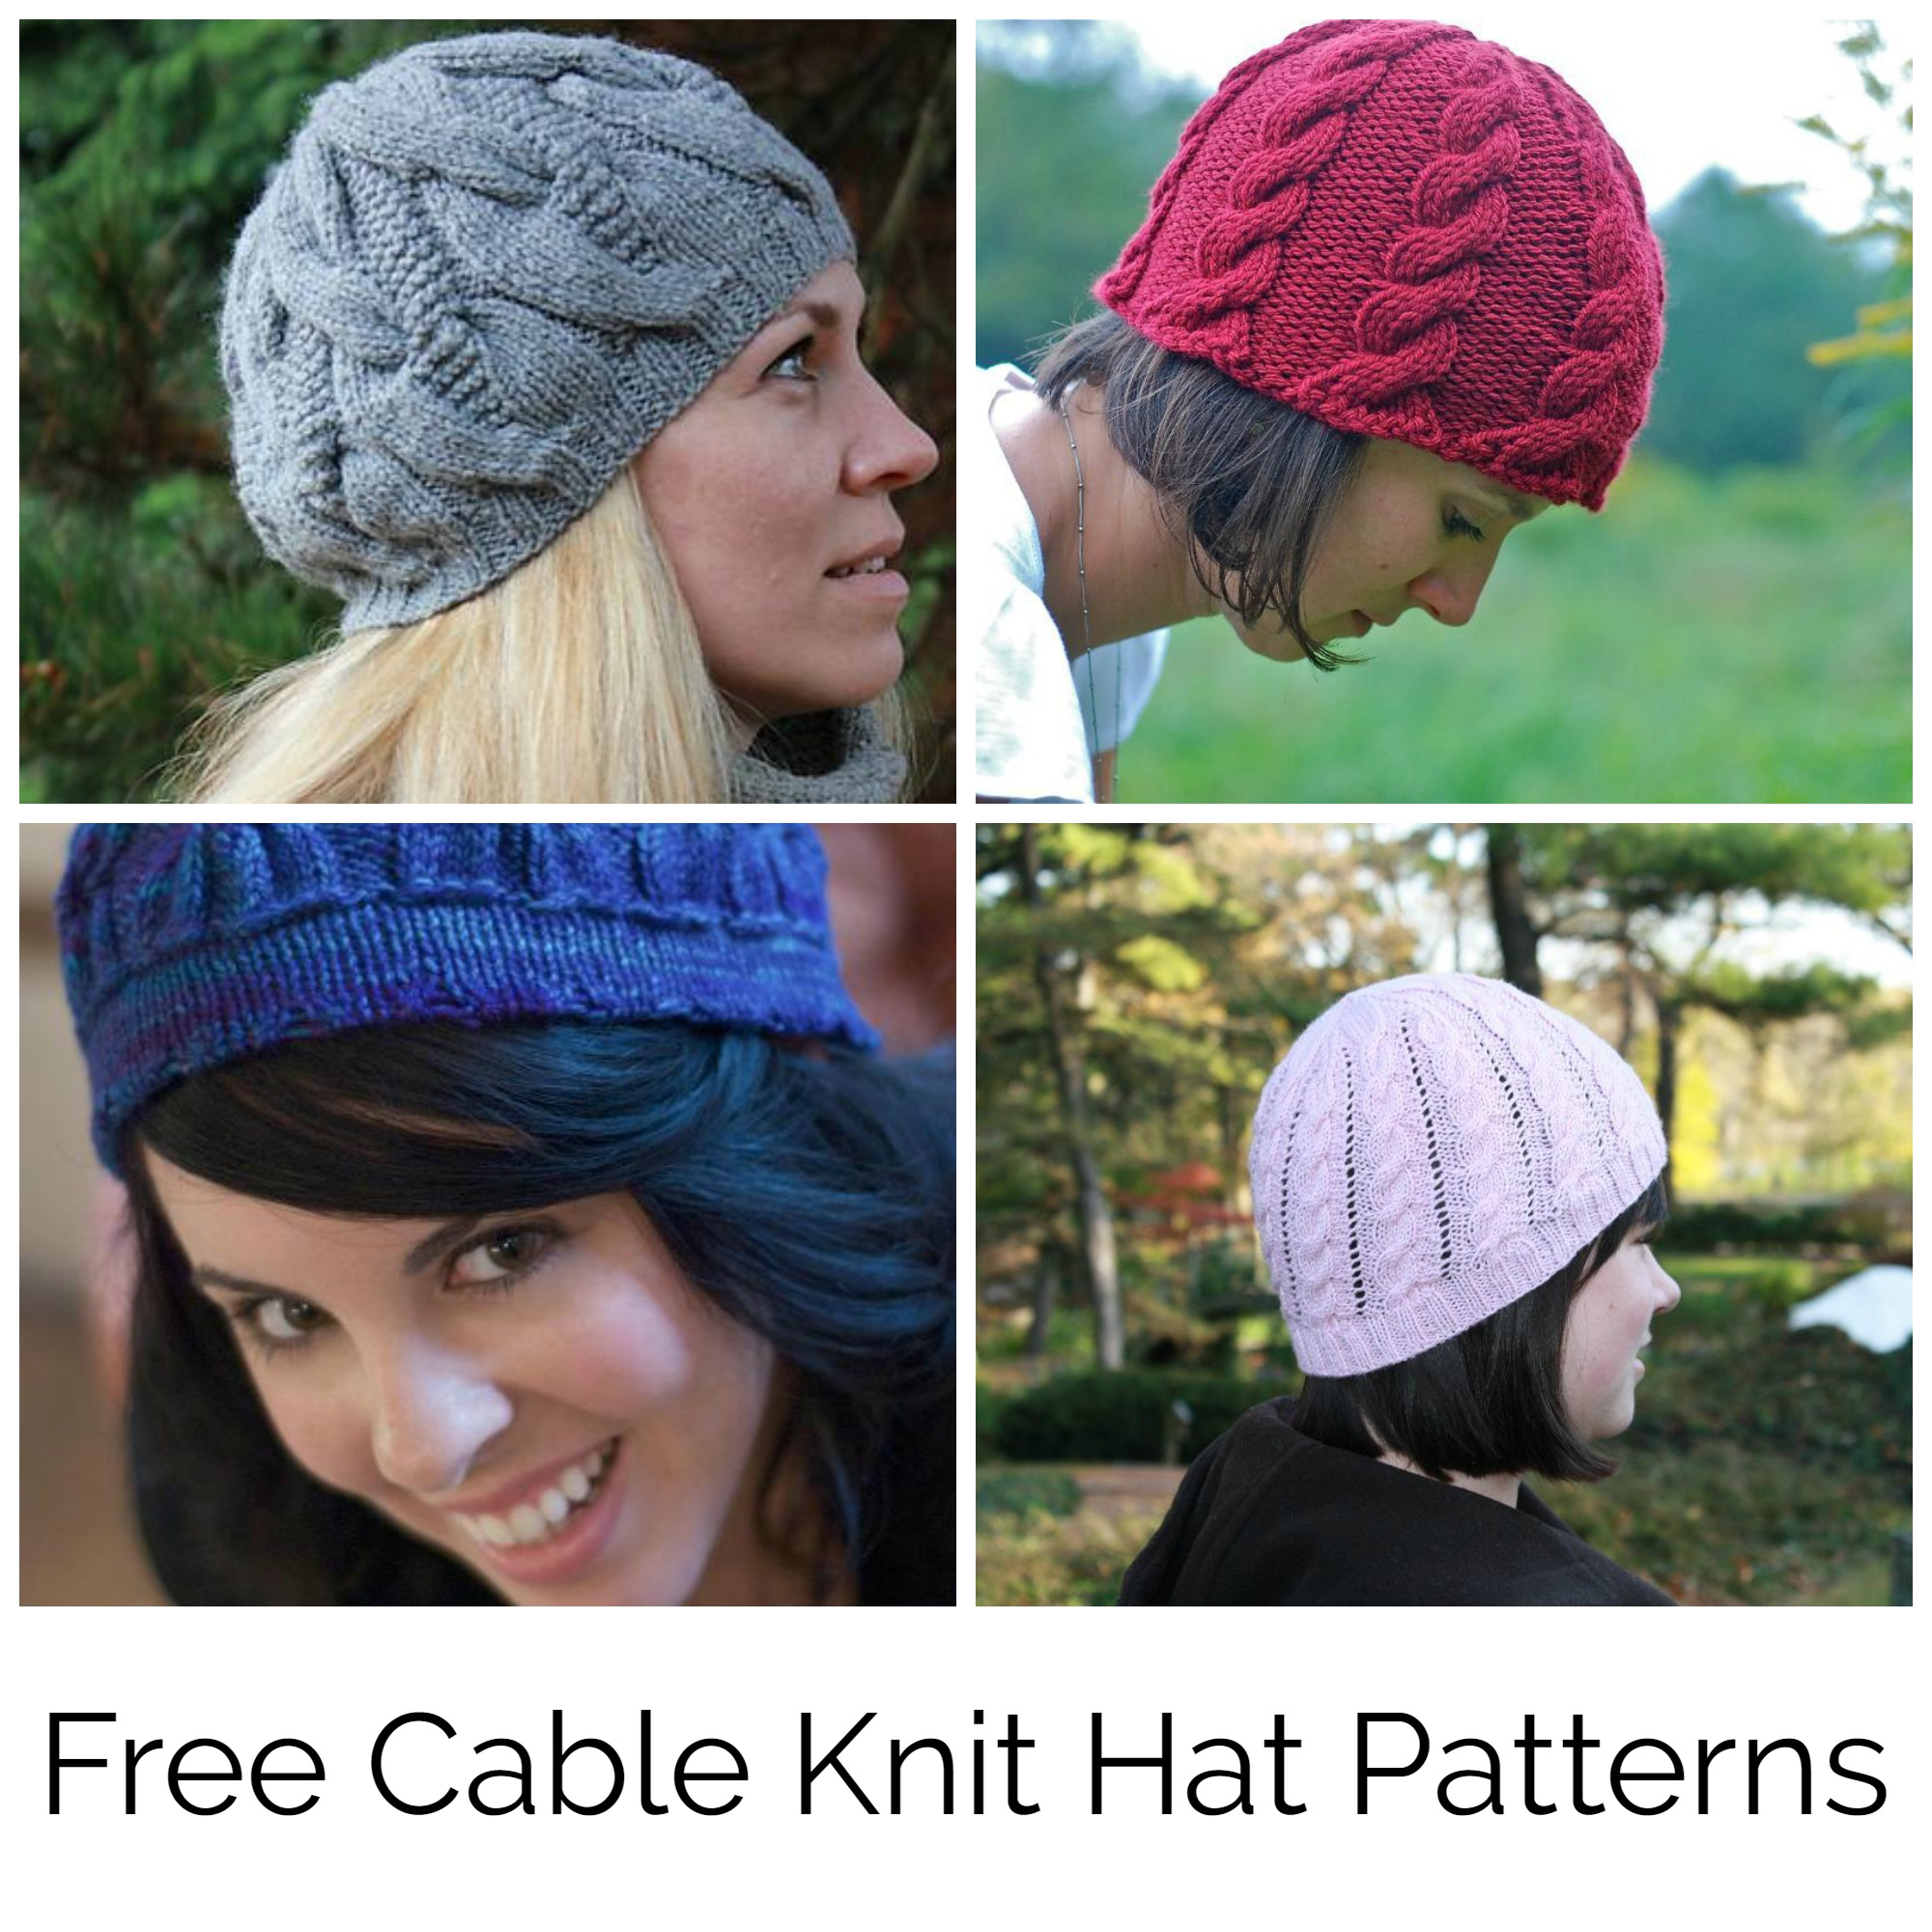 Free Knitting Patterns For Toques Find Your Favorite Free Cable Knit Hat Pattern